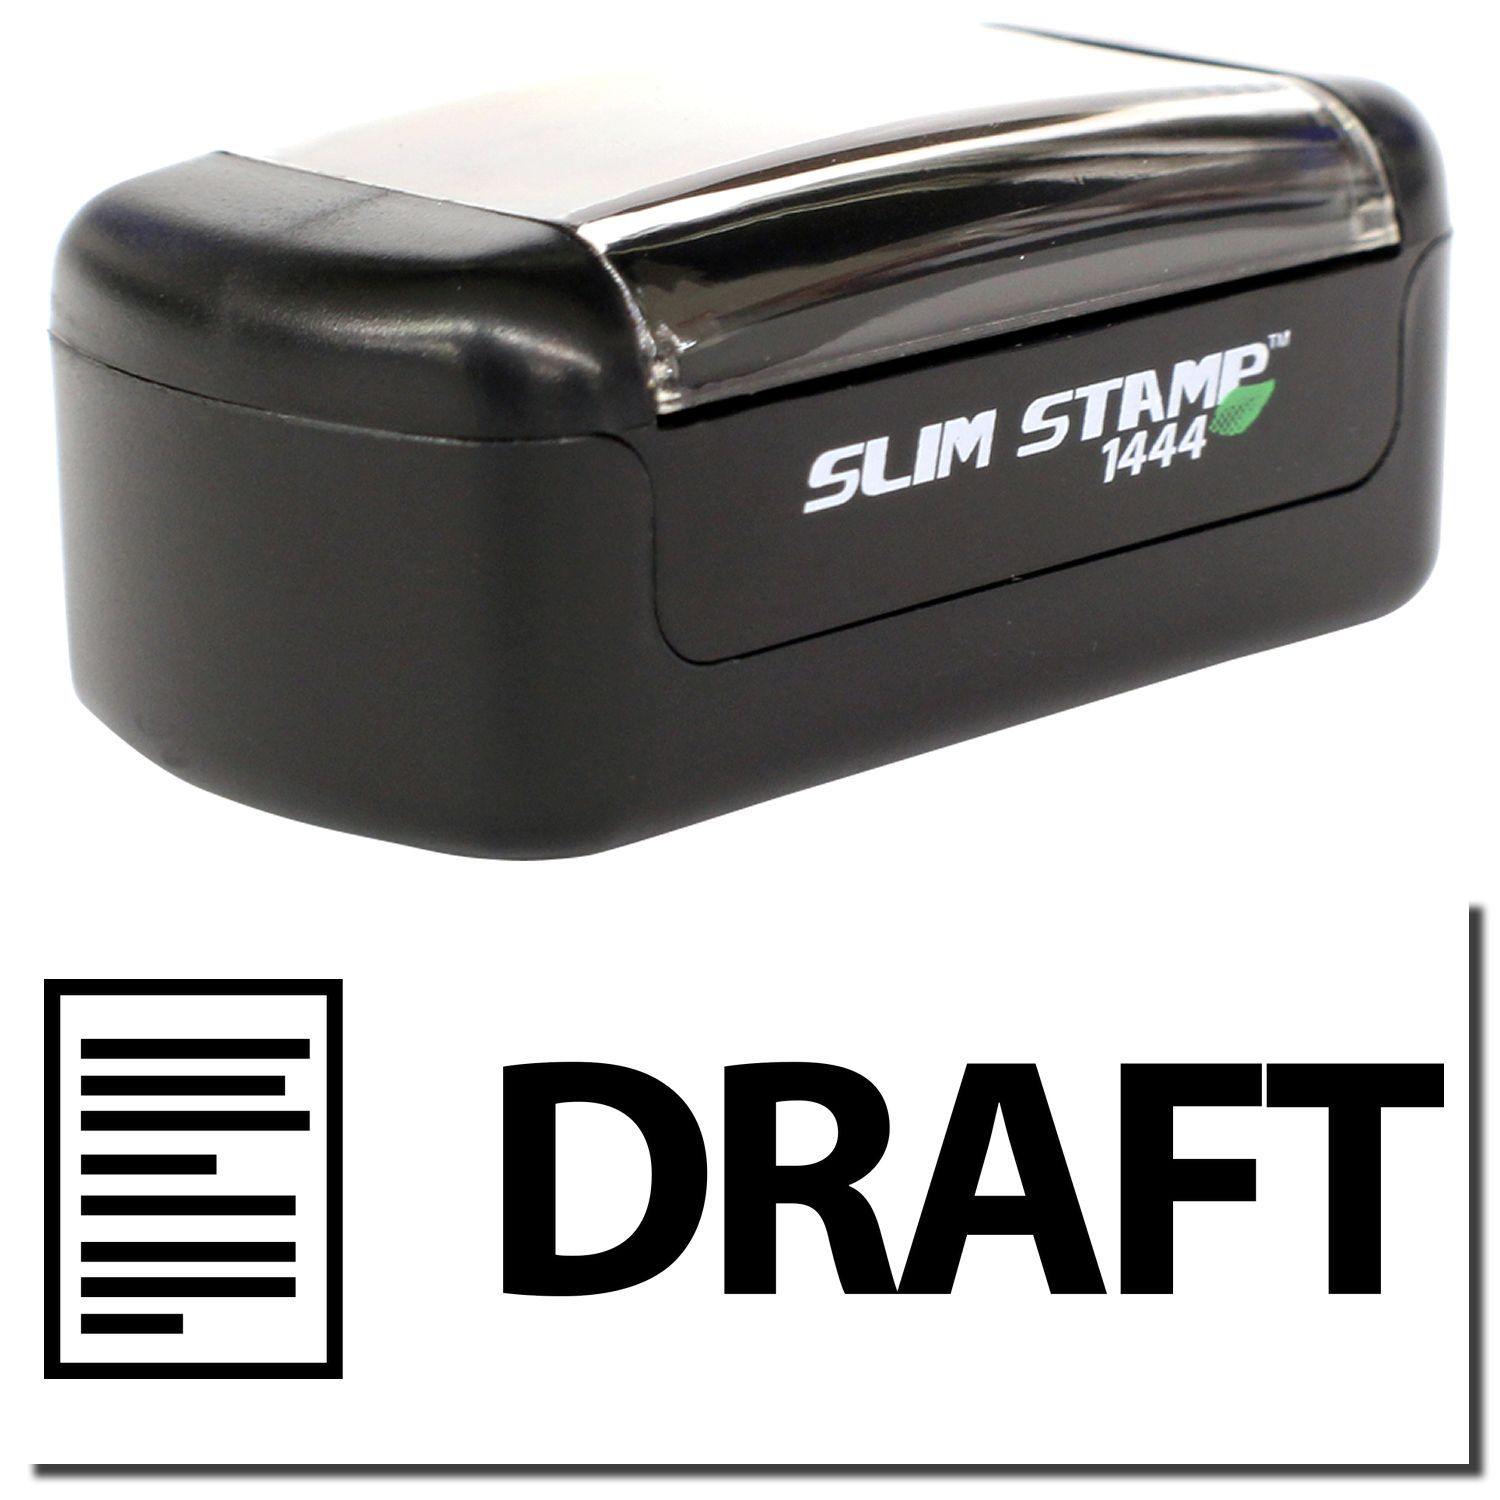 A stock office pre-inked stamp with a stamped image showing how the text "DRAFT" with an image of a letter on the left side is displayed after stamping.